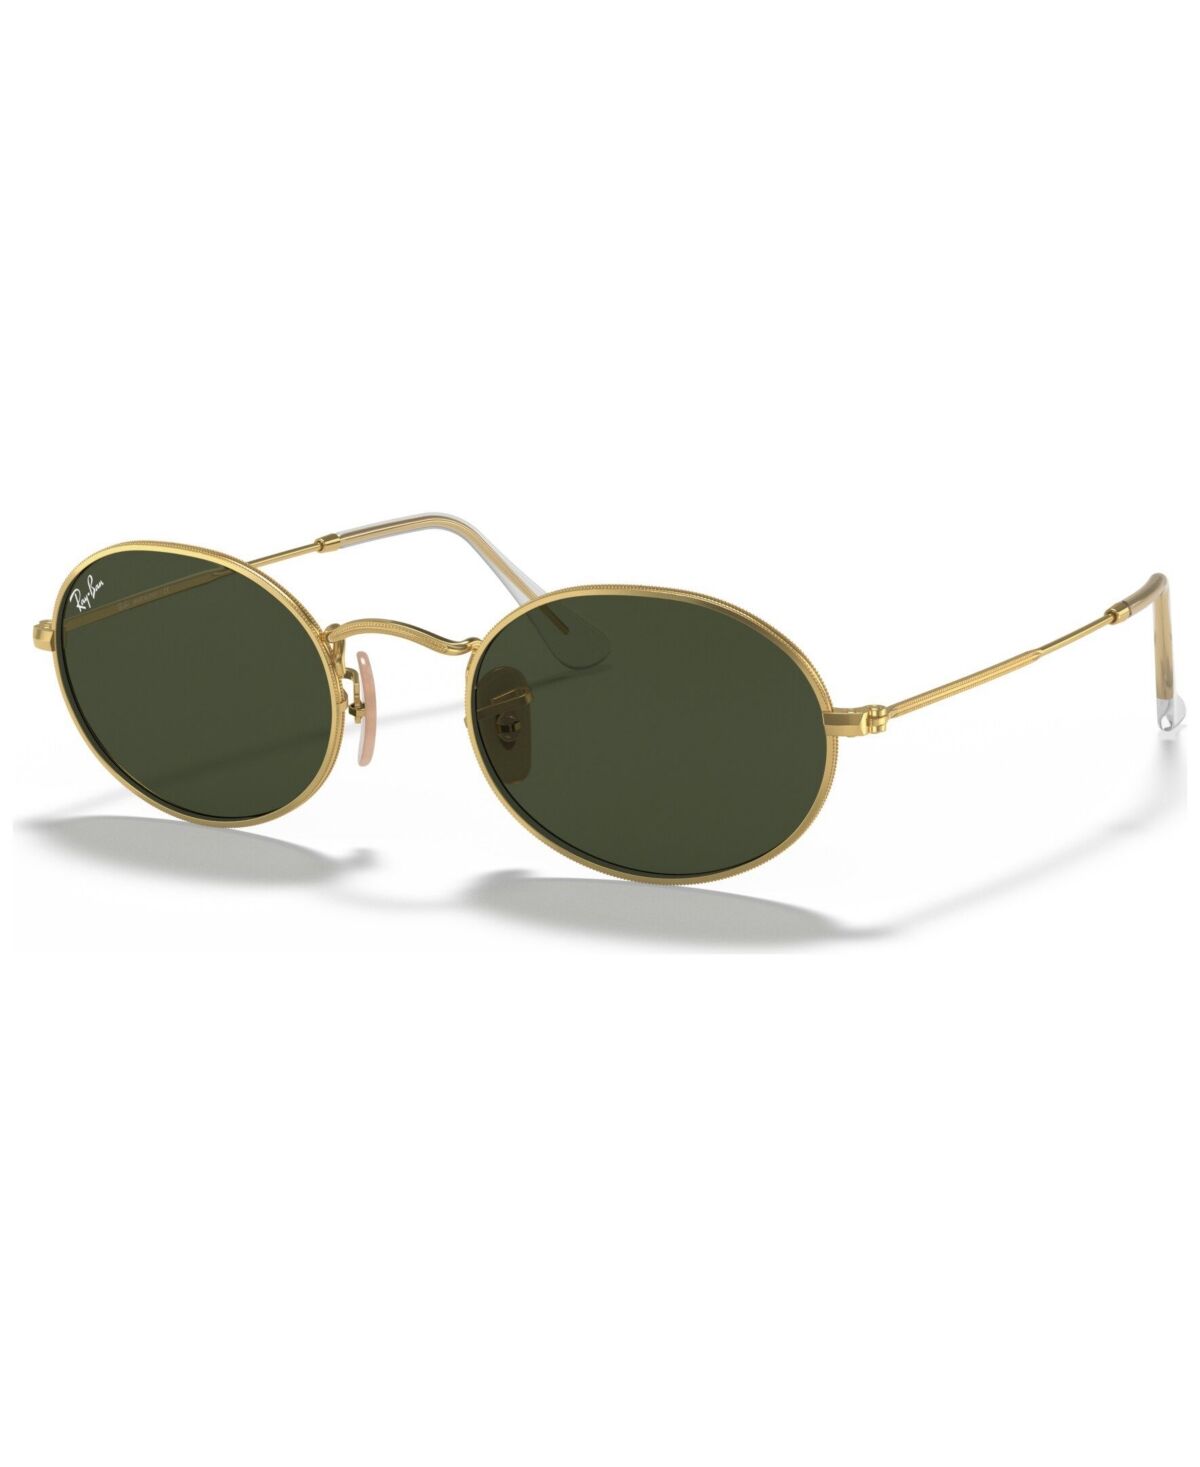 Ray-Ban Sunglasses, RB3547 51 - GOLD/GREEN